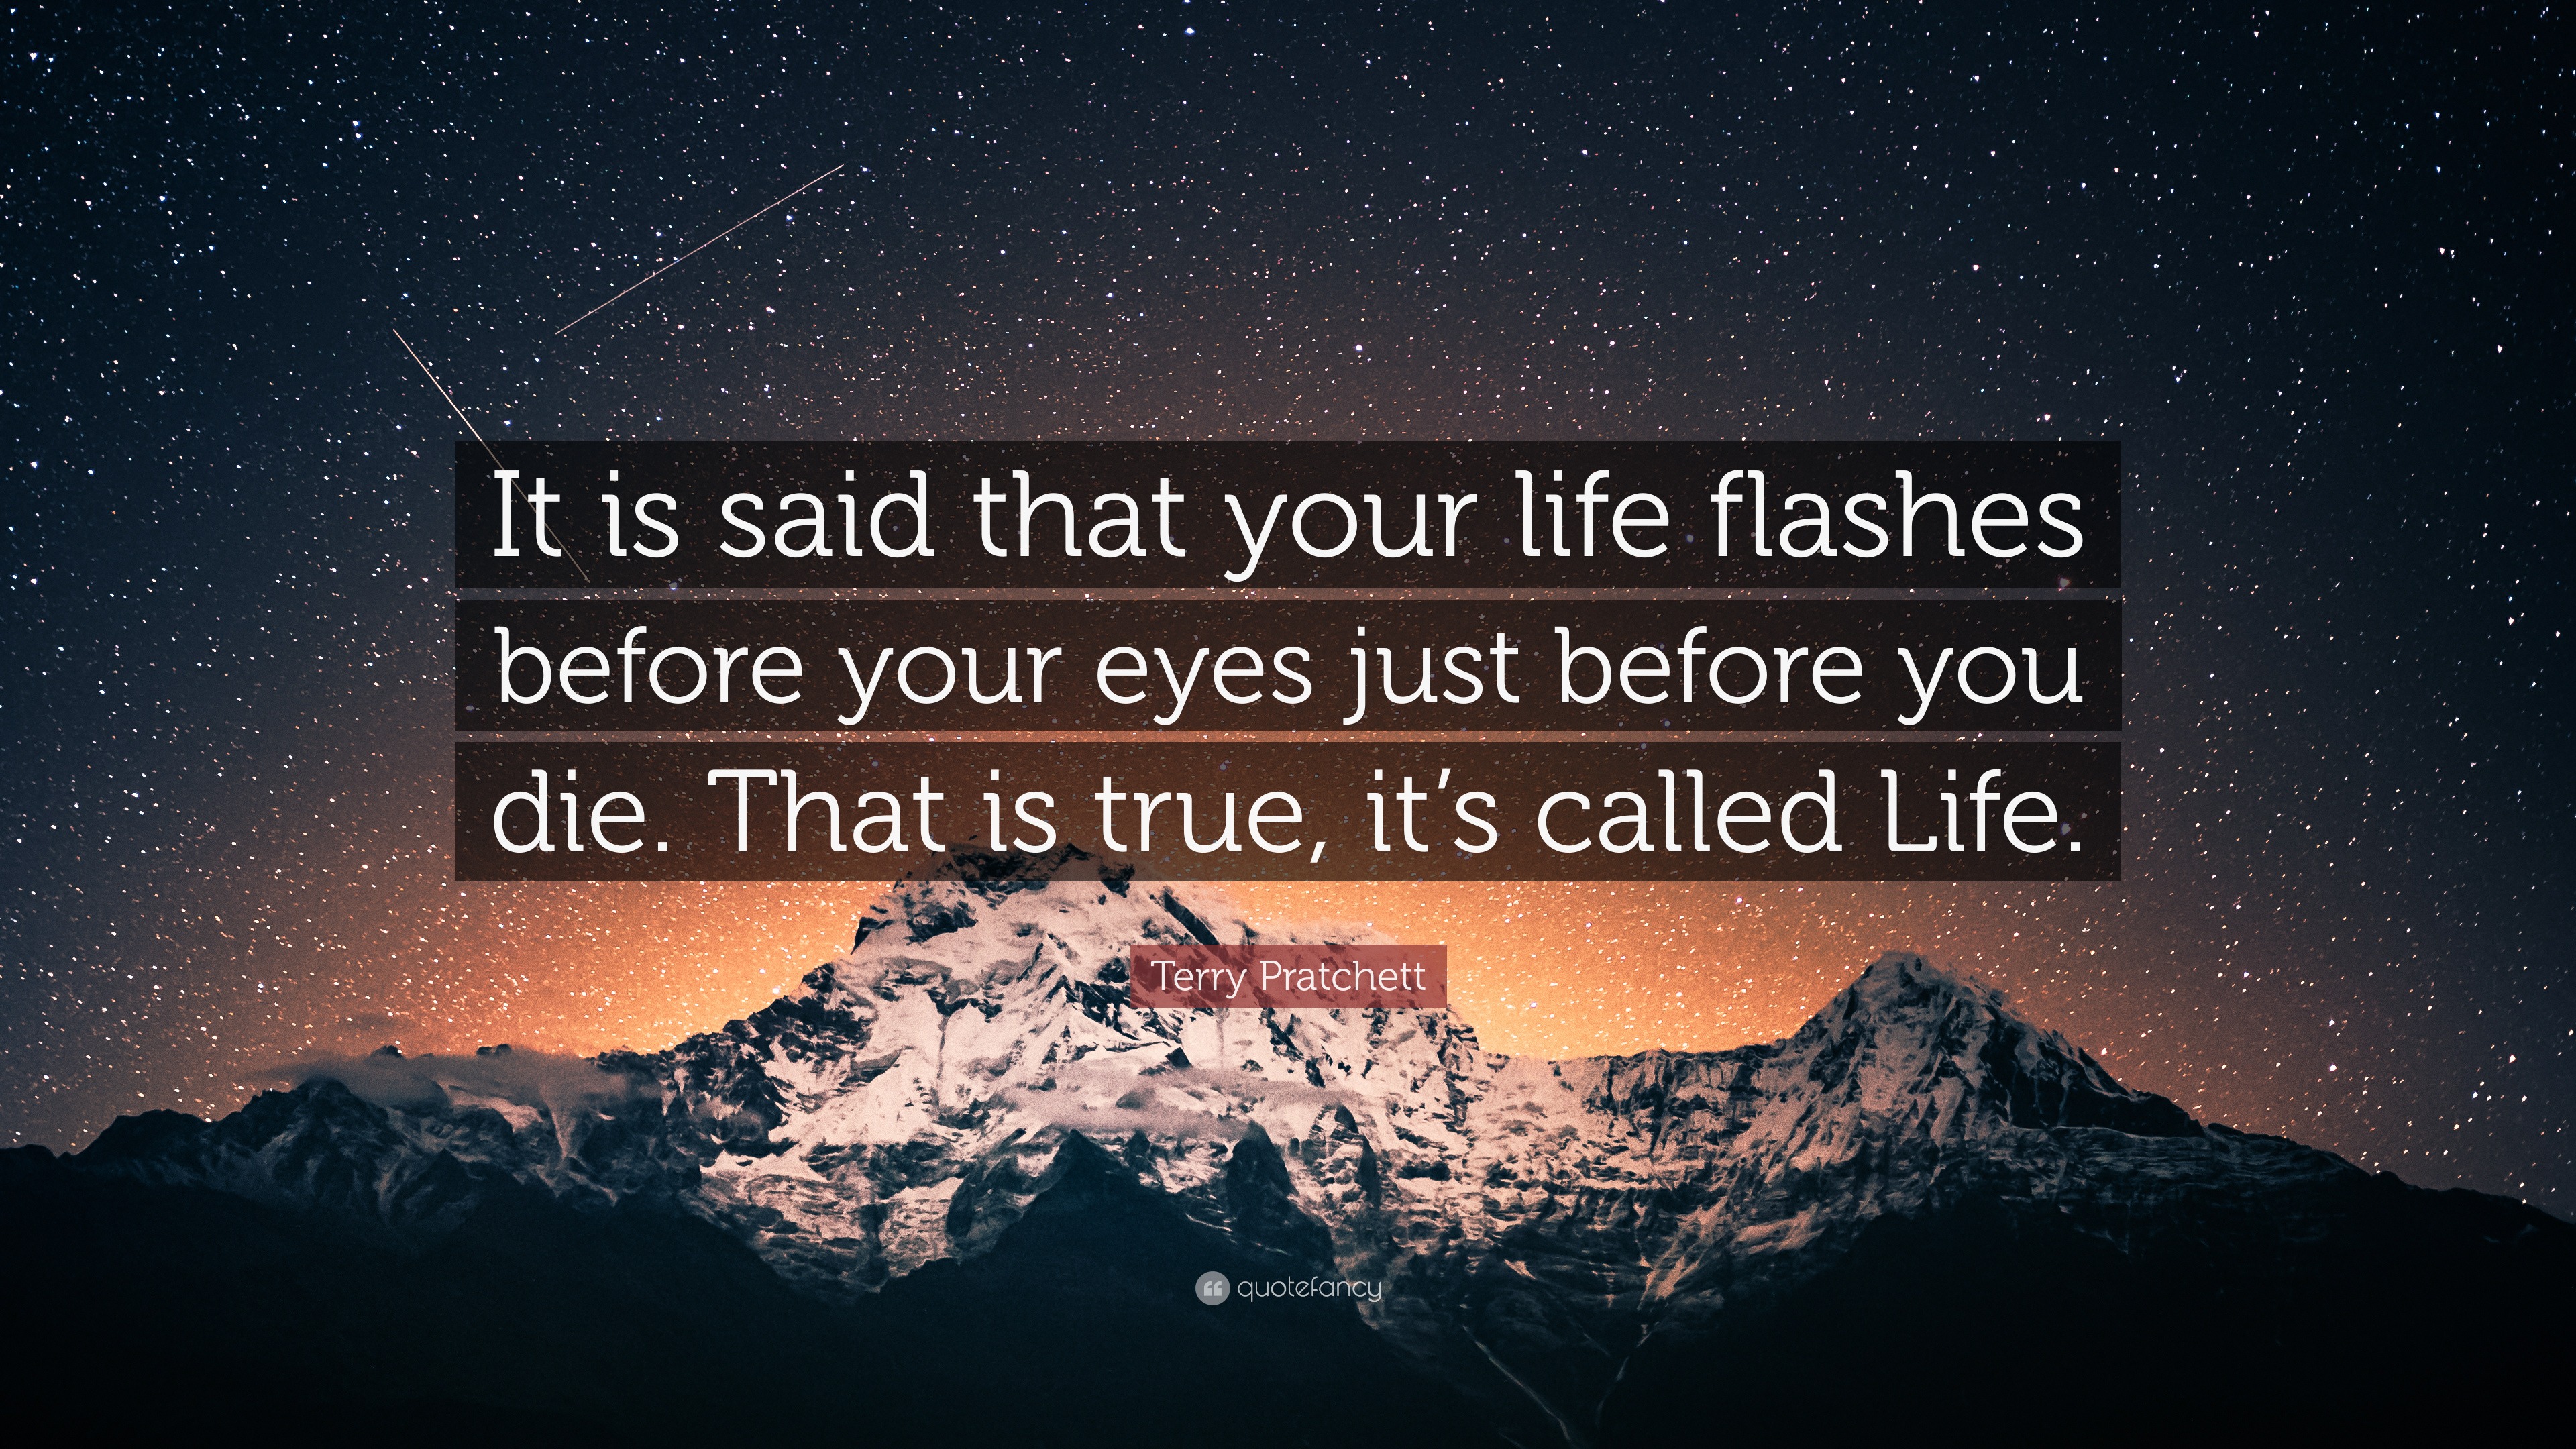 have a good life flash before your eyes